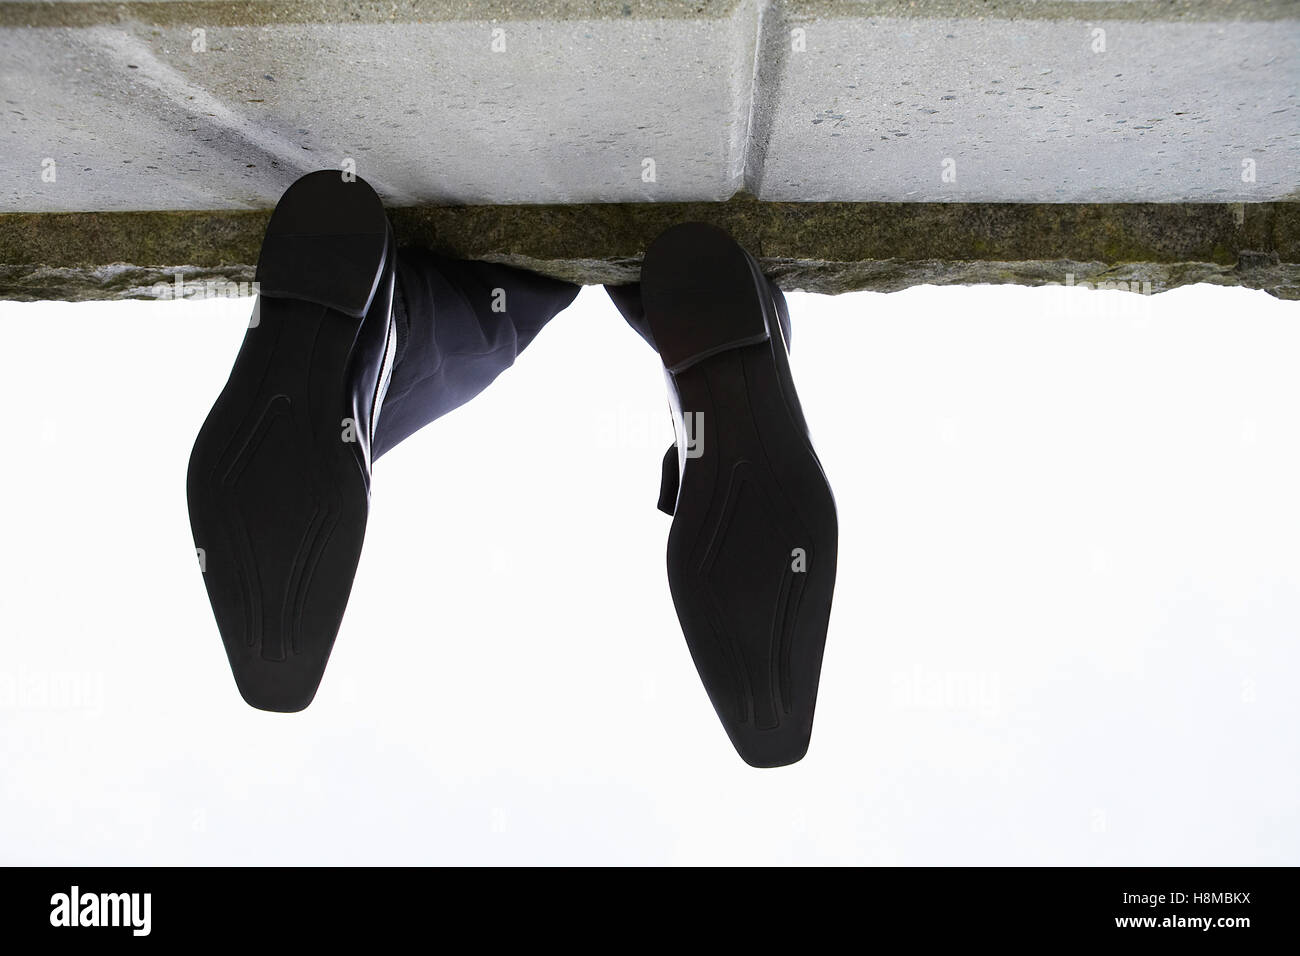 Feet dangling over wall, low angle view Stock Photo